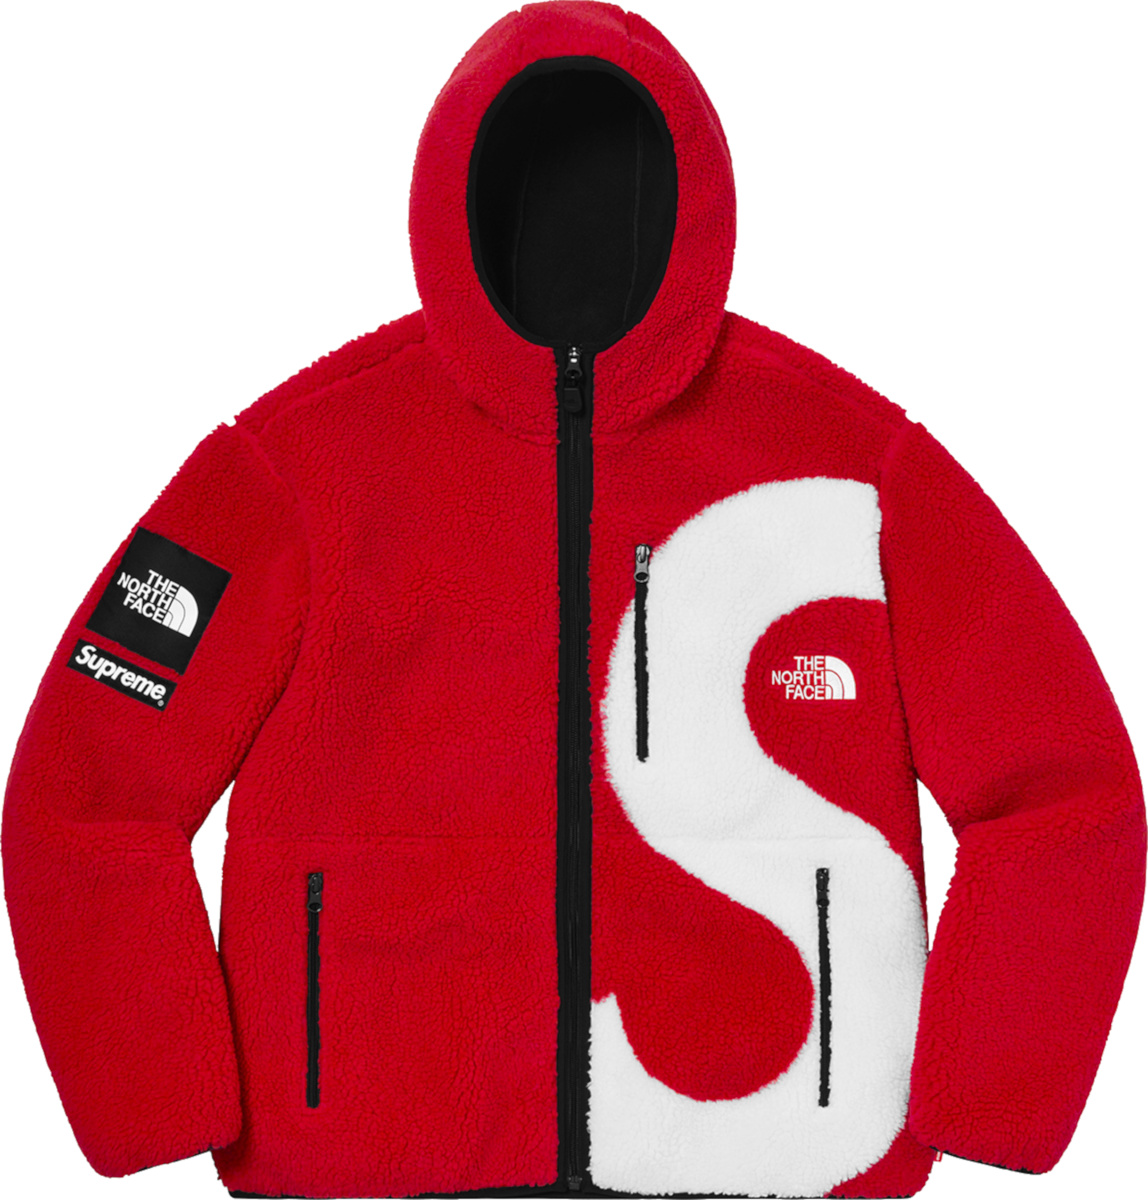 Supreme x The North Face Red S-Logo Fleece Jacket | Incorporated Style